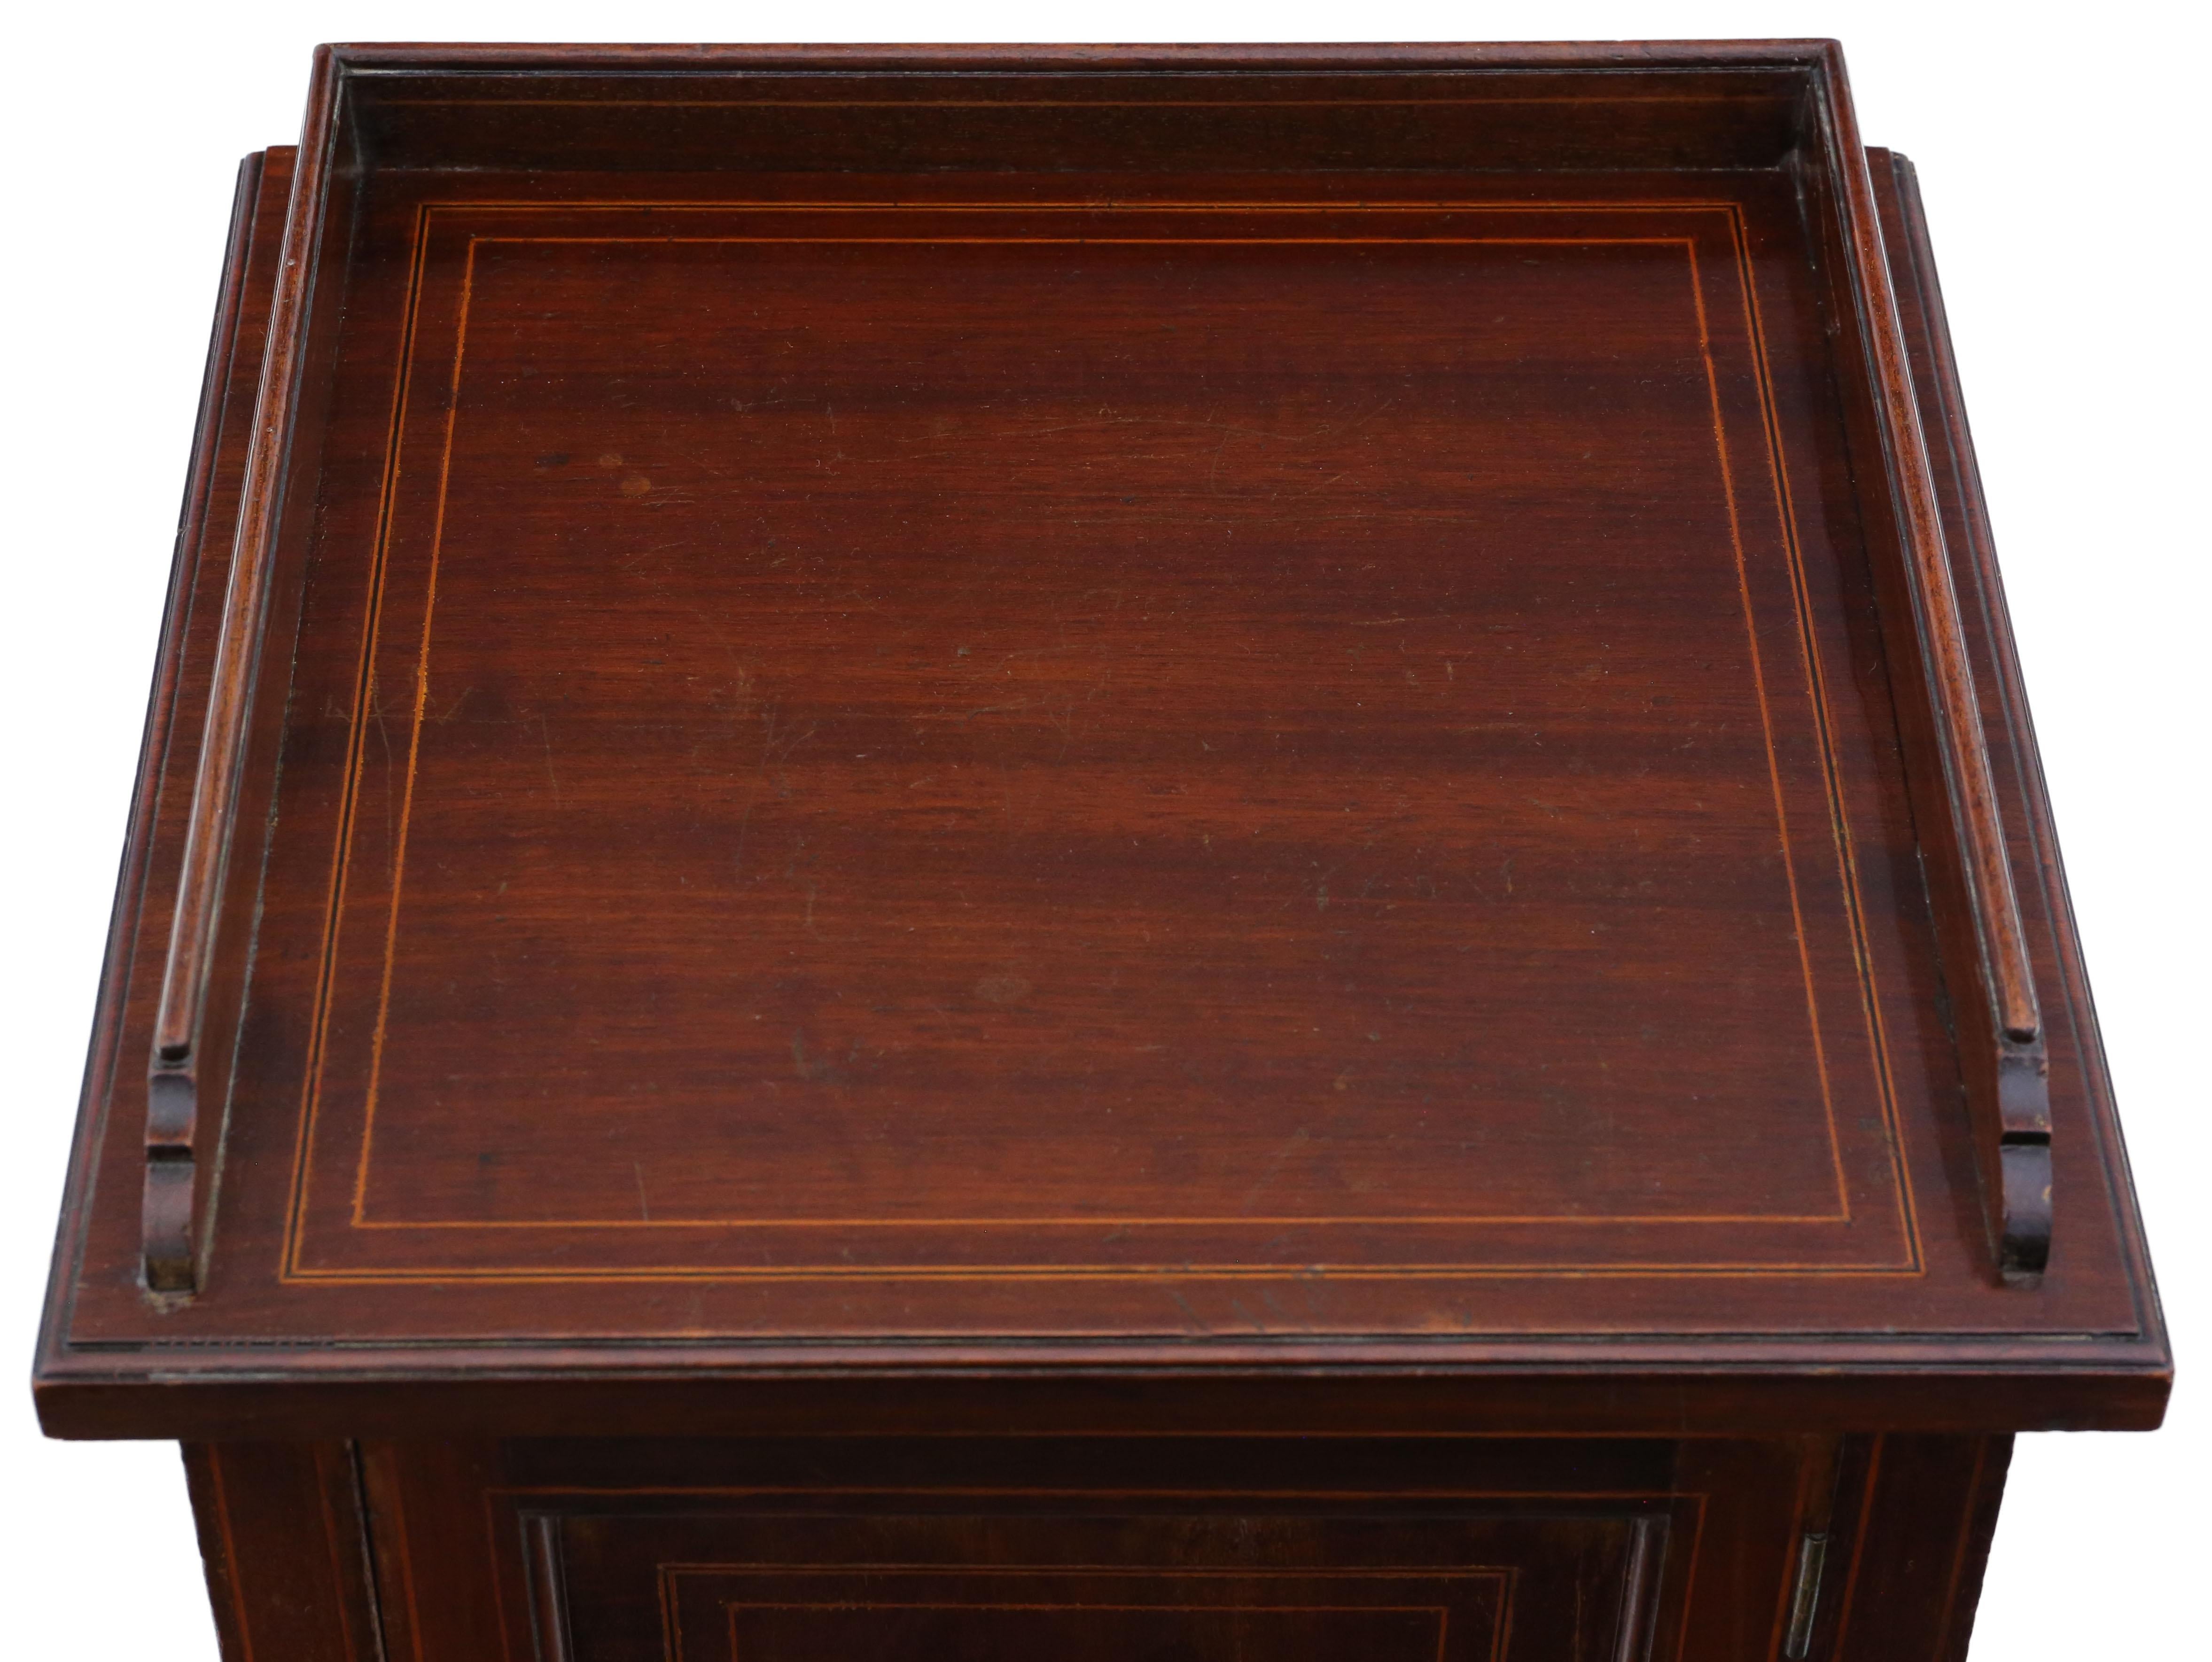 Antique Fine Quality Tray Top Inlaid Mahogany Bedside Table Cupboard, circa 1905 In Good Condition For Sale In Wisbech, Cambridgeshire